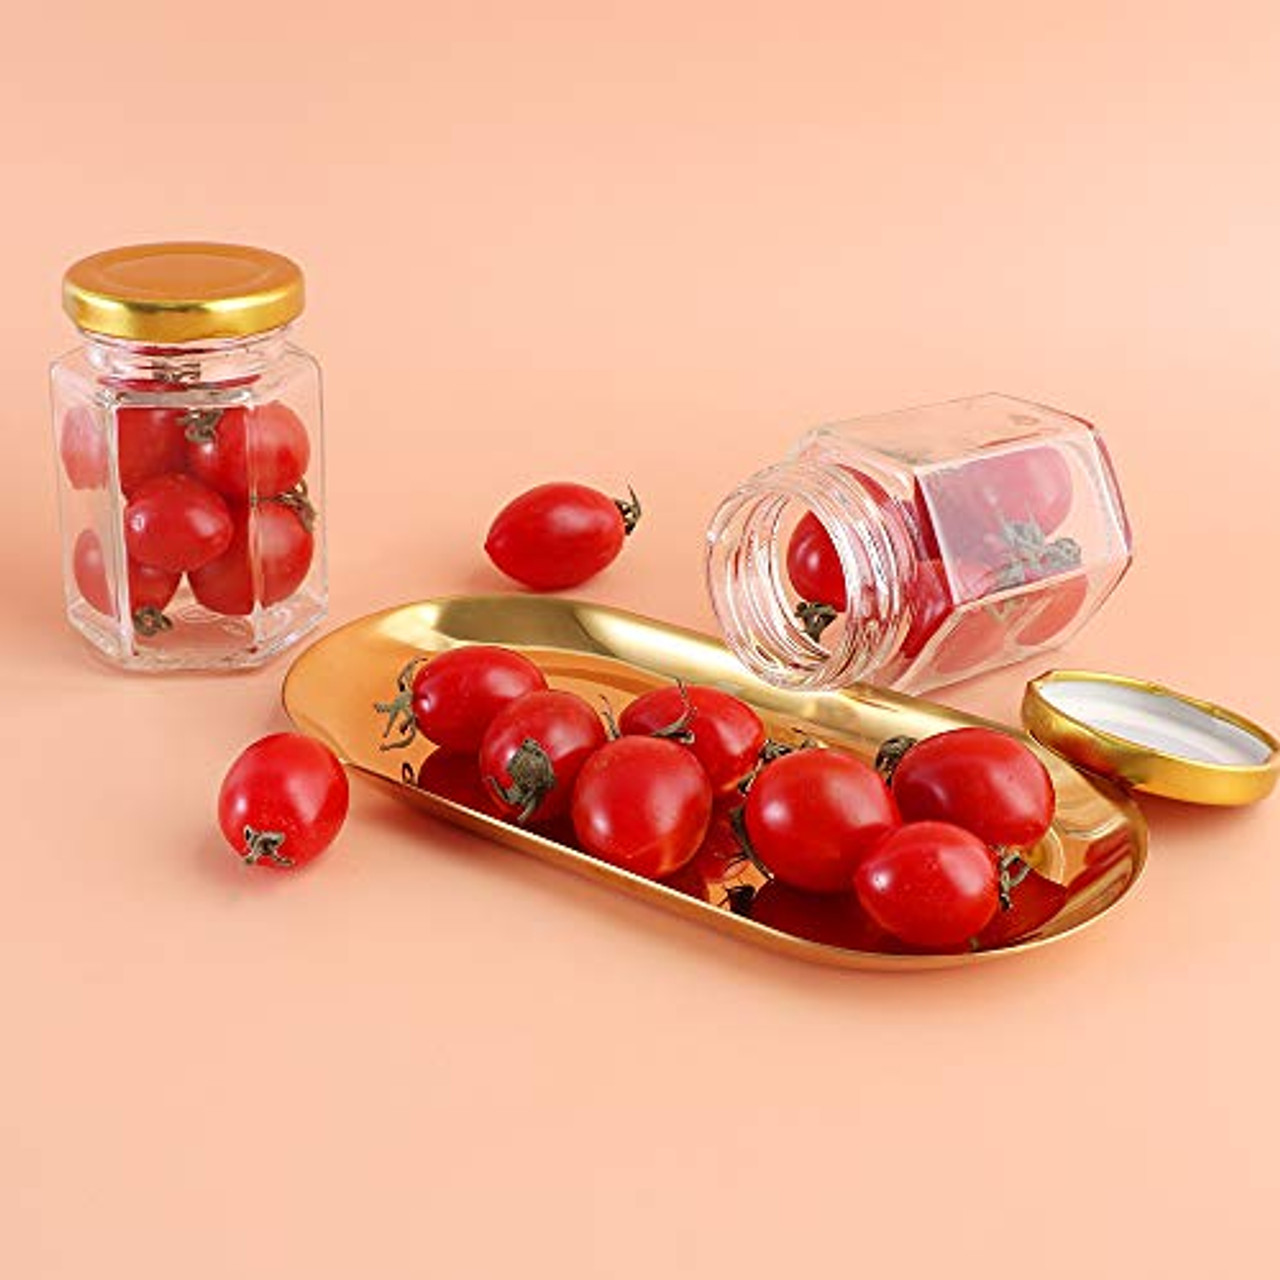 CycleMore 4oz Hexagon Glass Jars with Gold Lids, Clear Glass Canning Jars  Jam Jars Bottles for Jams, Honey, Wedding Favors, Baby Foods, Gifts and